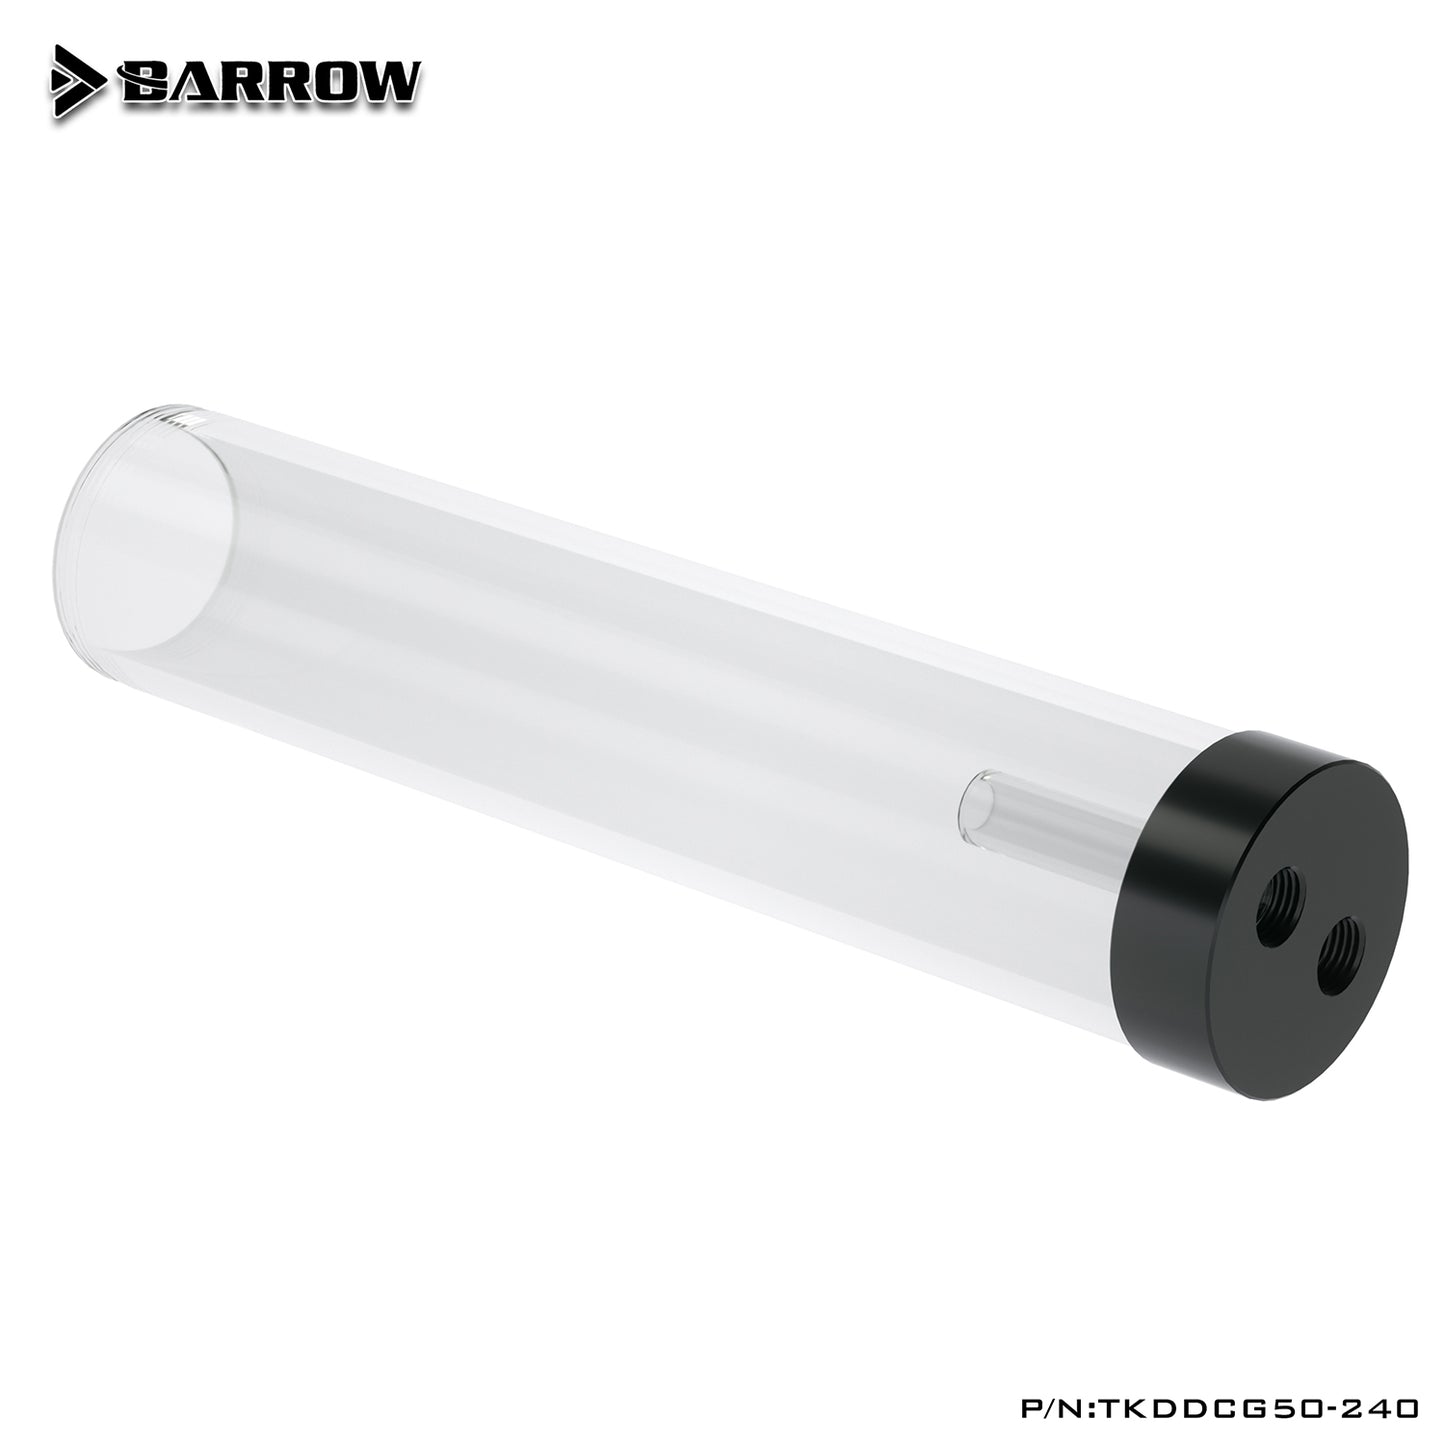 Barrow 17W Series Combination Reservoirs, For Barrow 17W Pumps With Thread, TKDDCG50